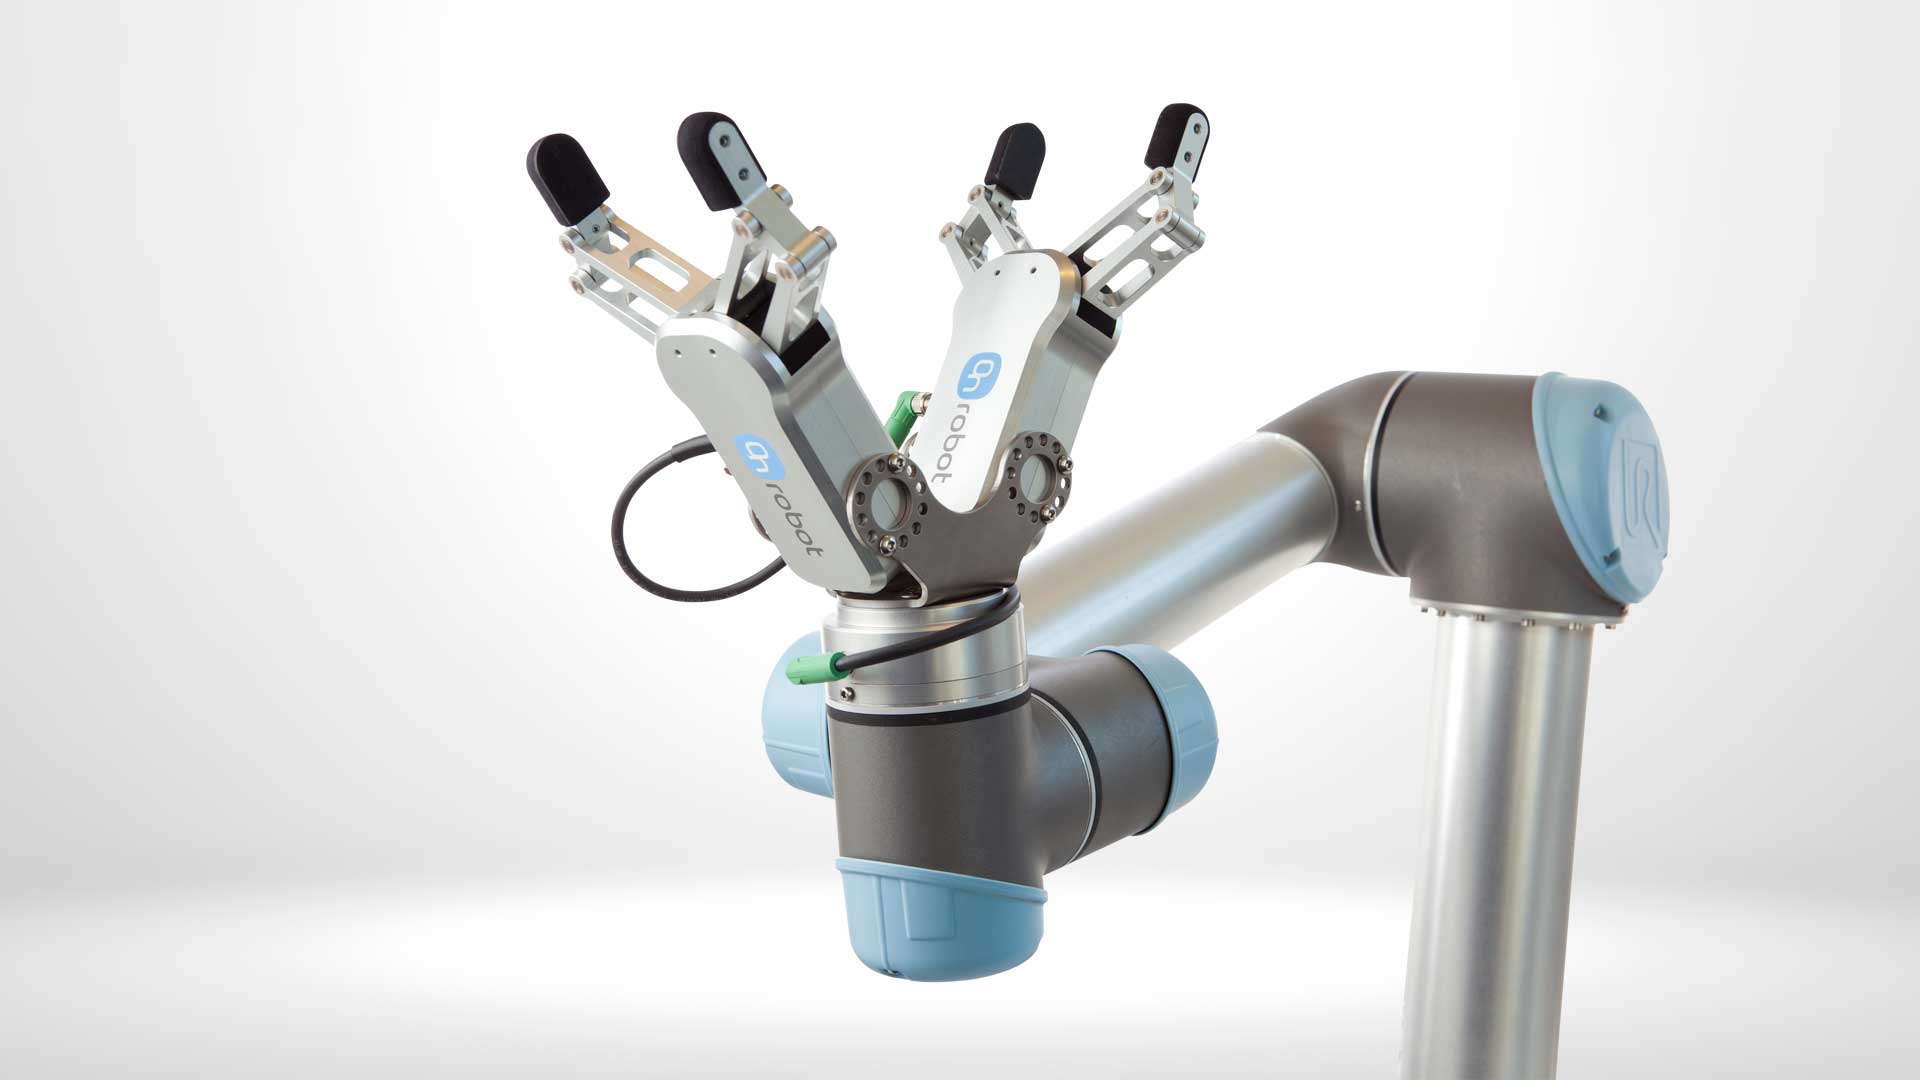 on-robot-grippers-for-collaborative-cobots2